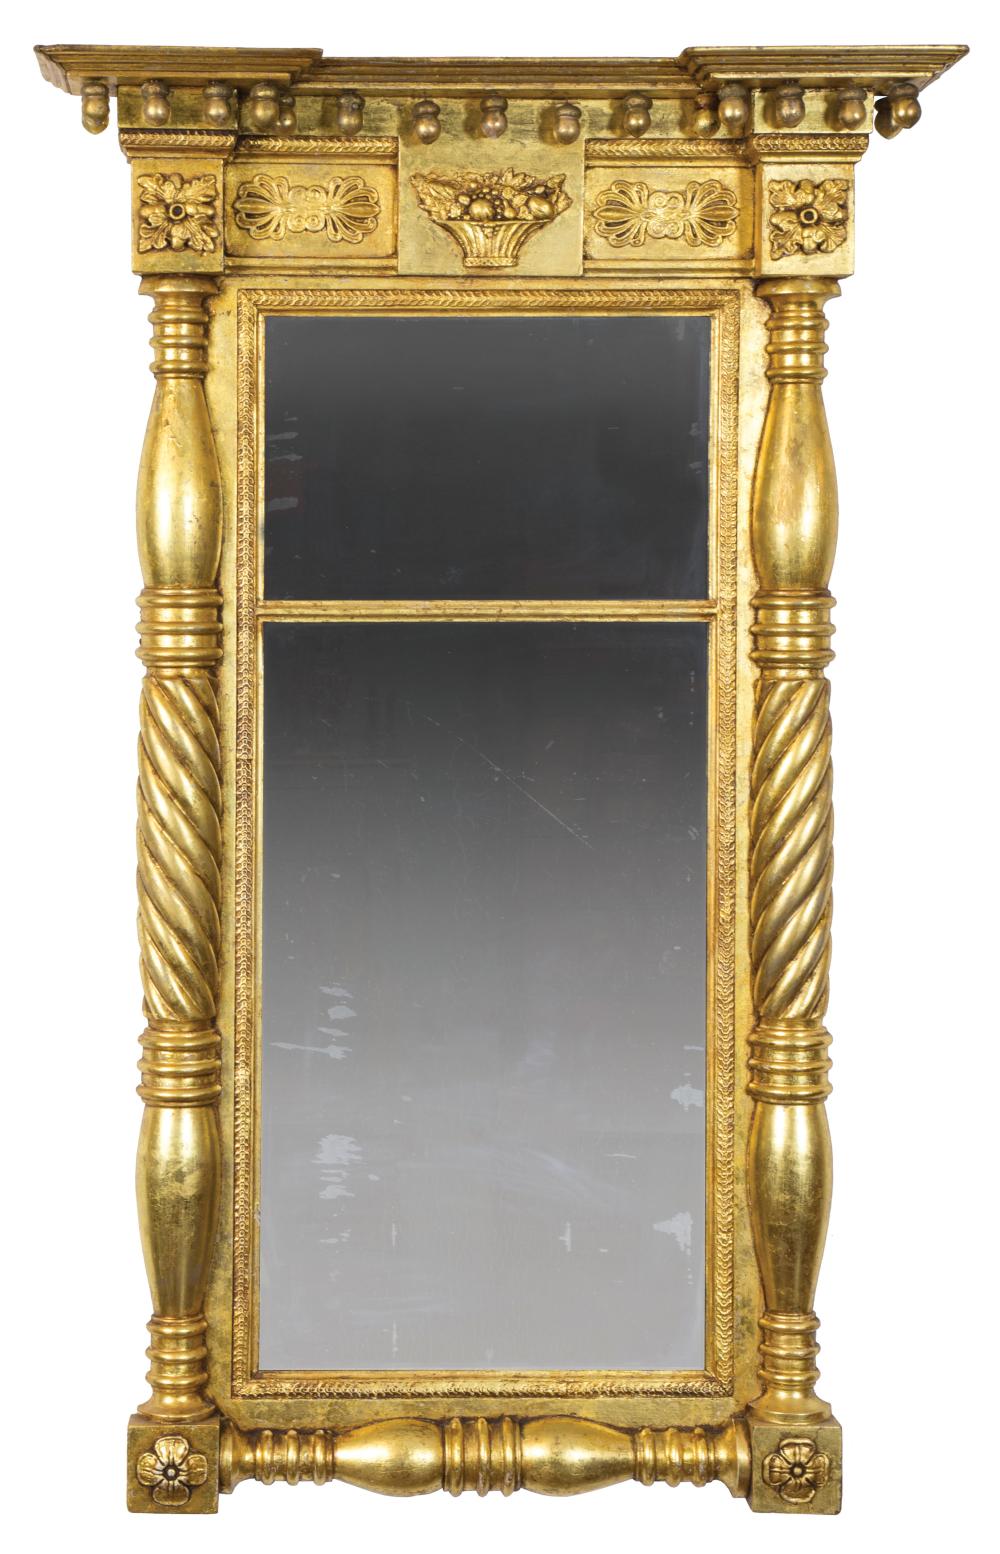 AMERICAN CLASSICAL GILTWOOD PIER 31a9c8